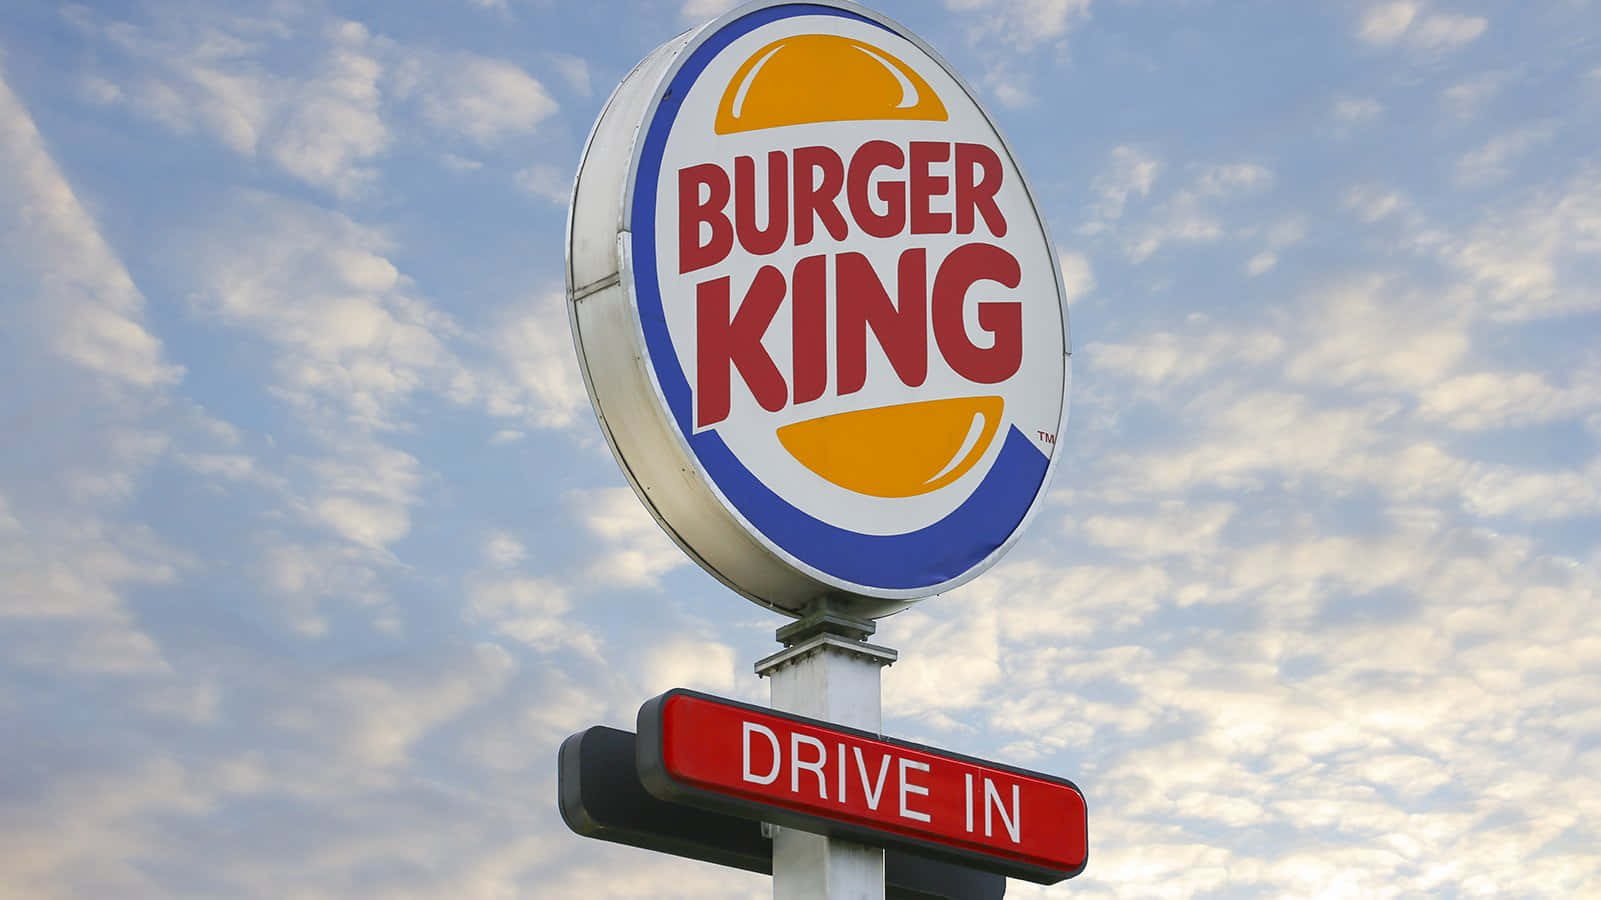 Feel the taste of the King at Burger King!